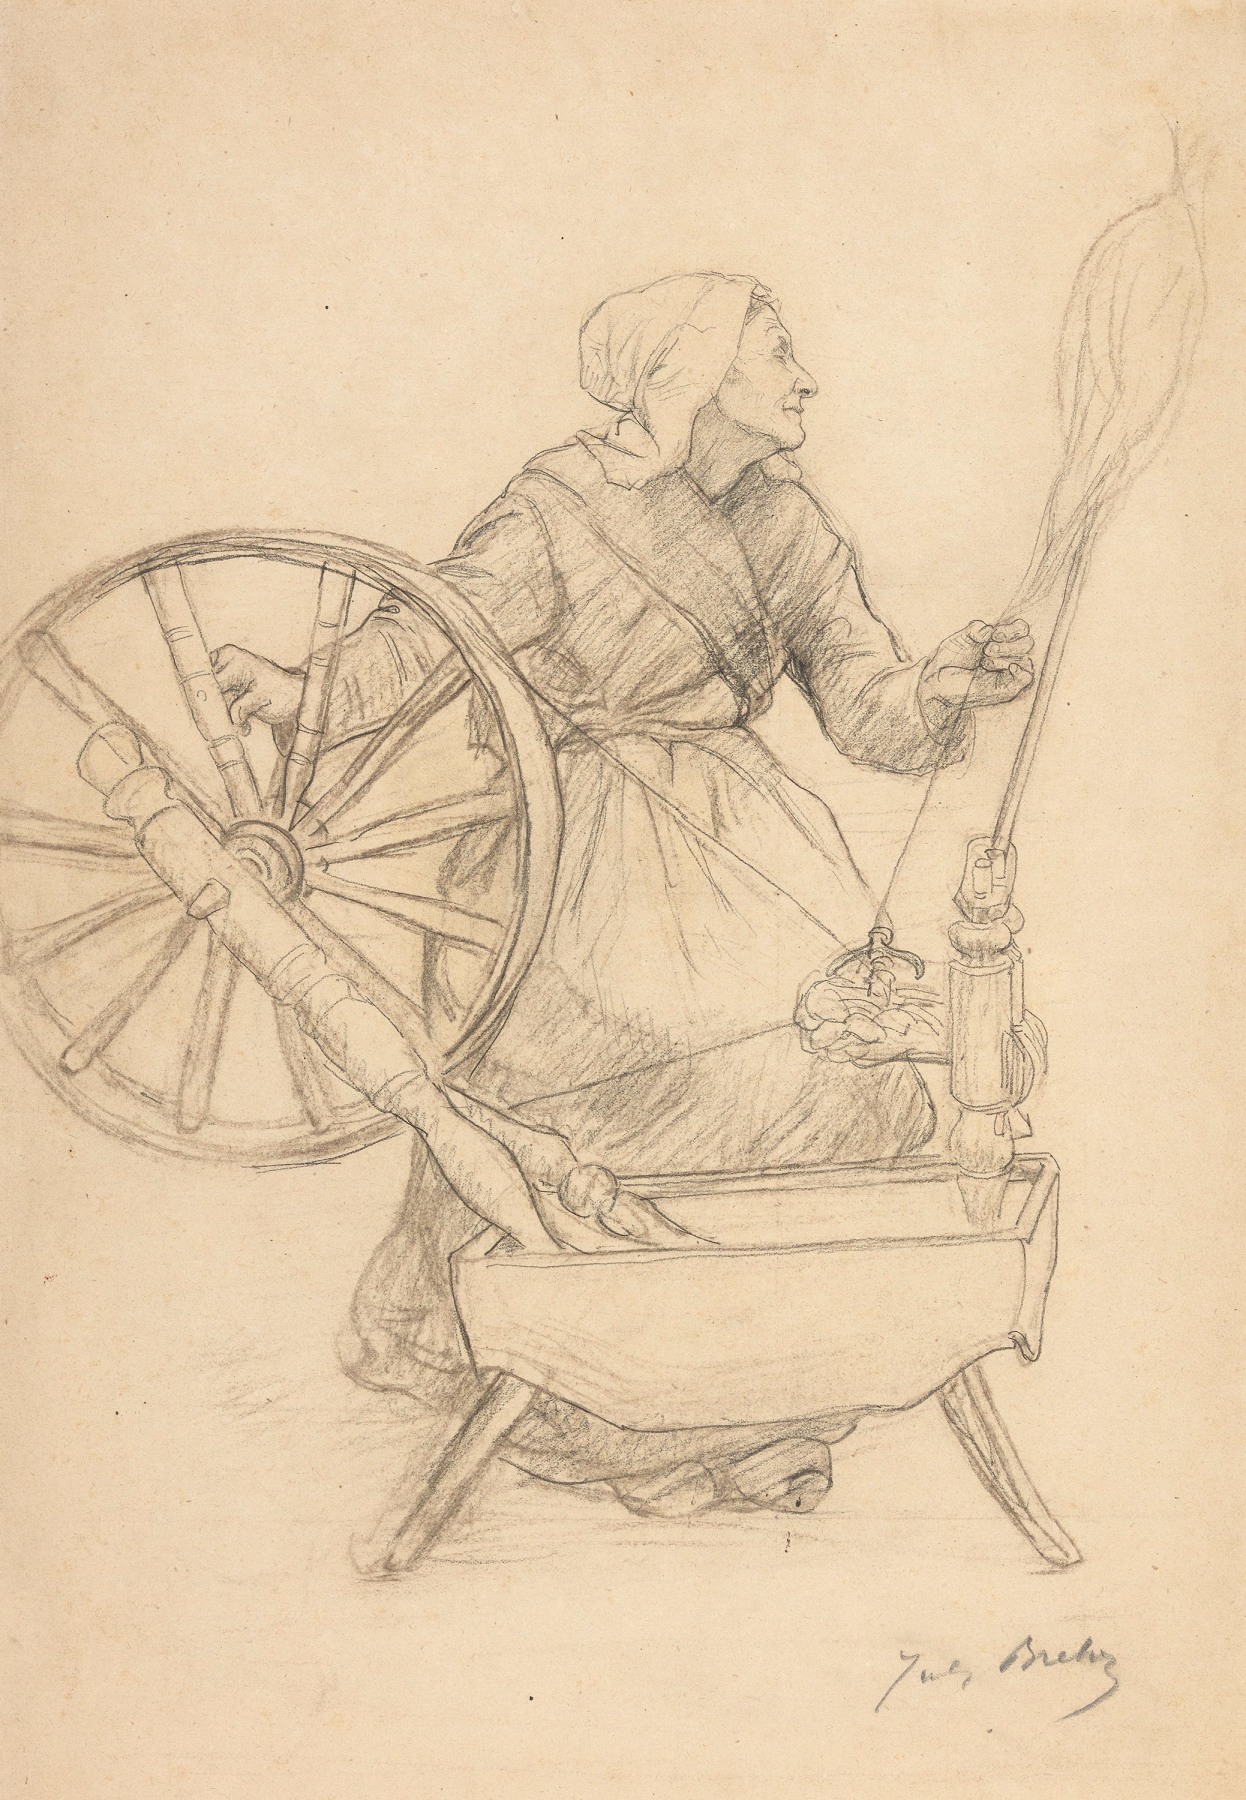 Jules Breton  La Femme au Rouet (Woman at the Spinning Wheel), 1884  Charcoal and black chalk on paper 18 1/2 x 13 3/8 inches